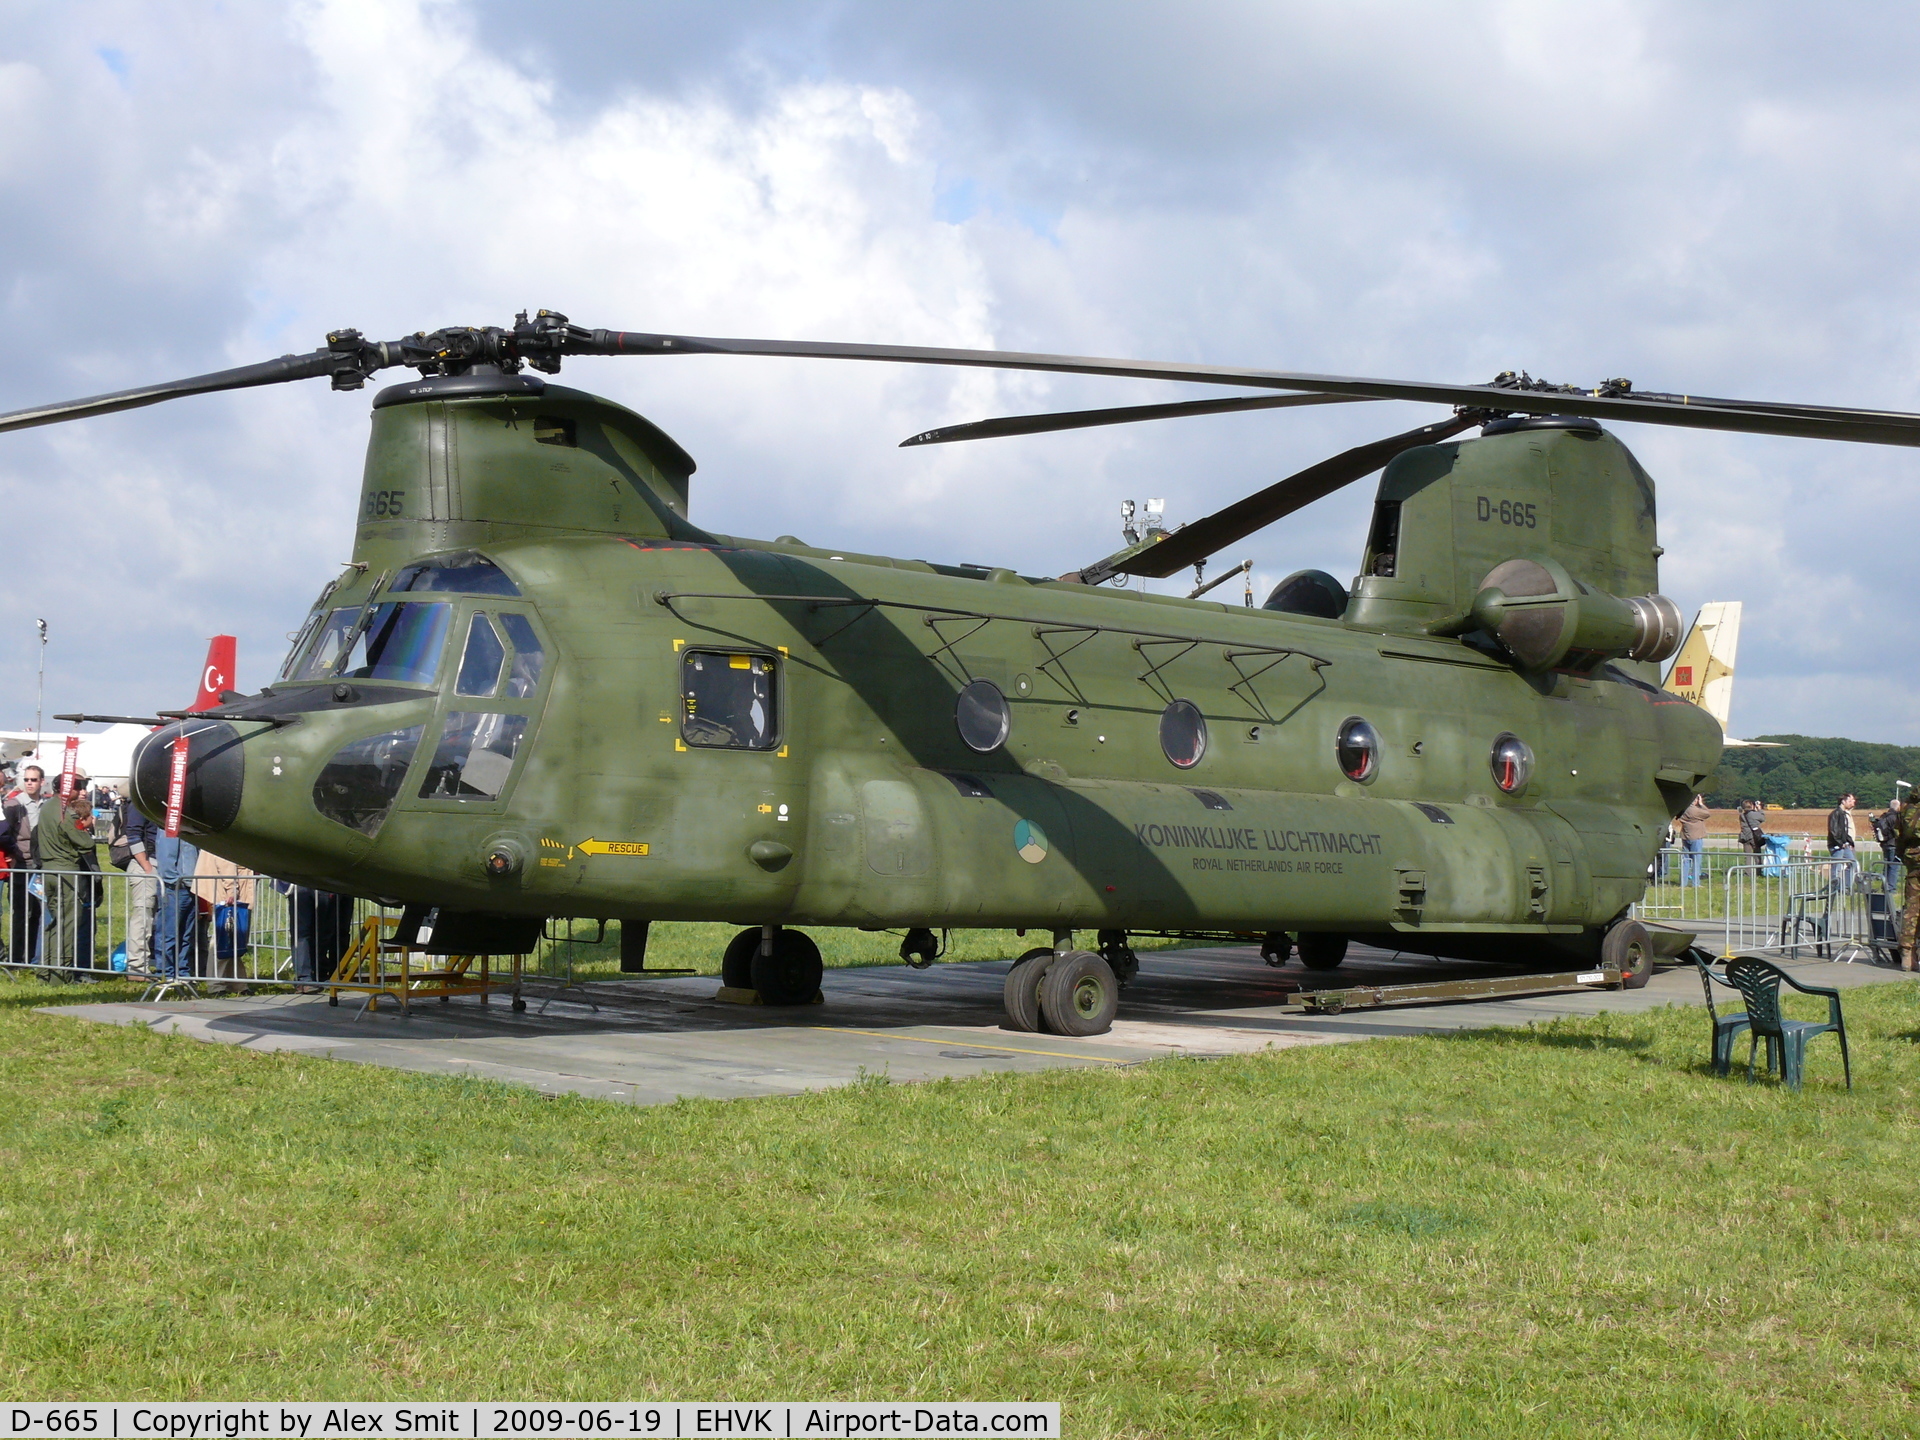 D-665, Boeing CH-47D Chinook C/N M.3665/NL-005, Boeing Vertol CH-47D Chinook D-665 Royal Netherlands Air Force